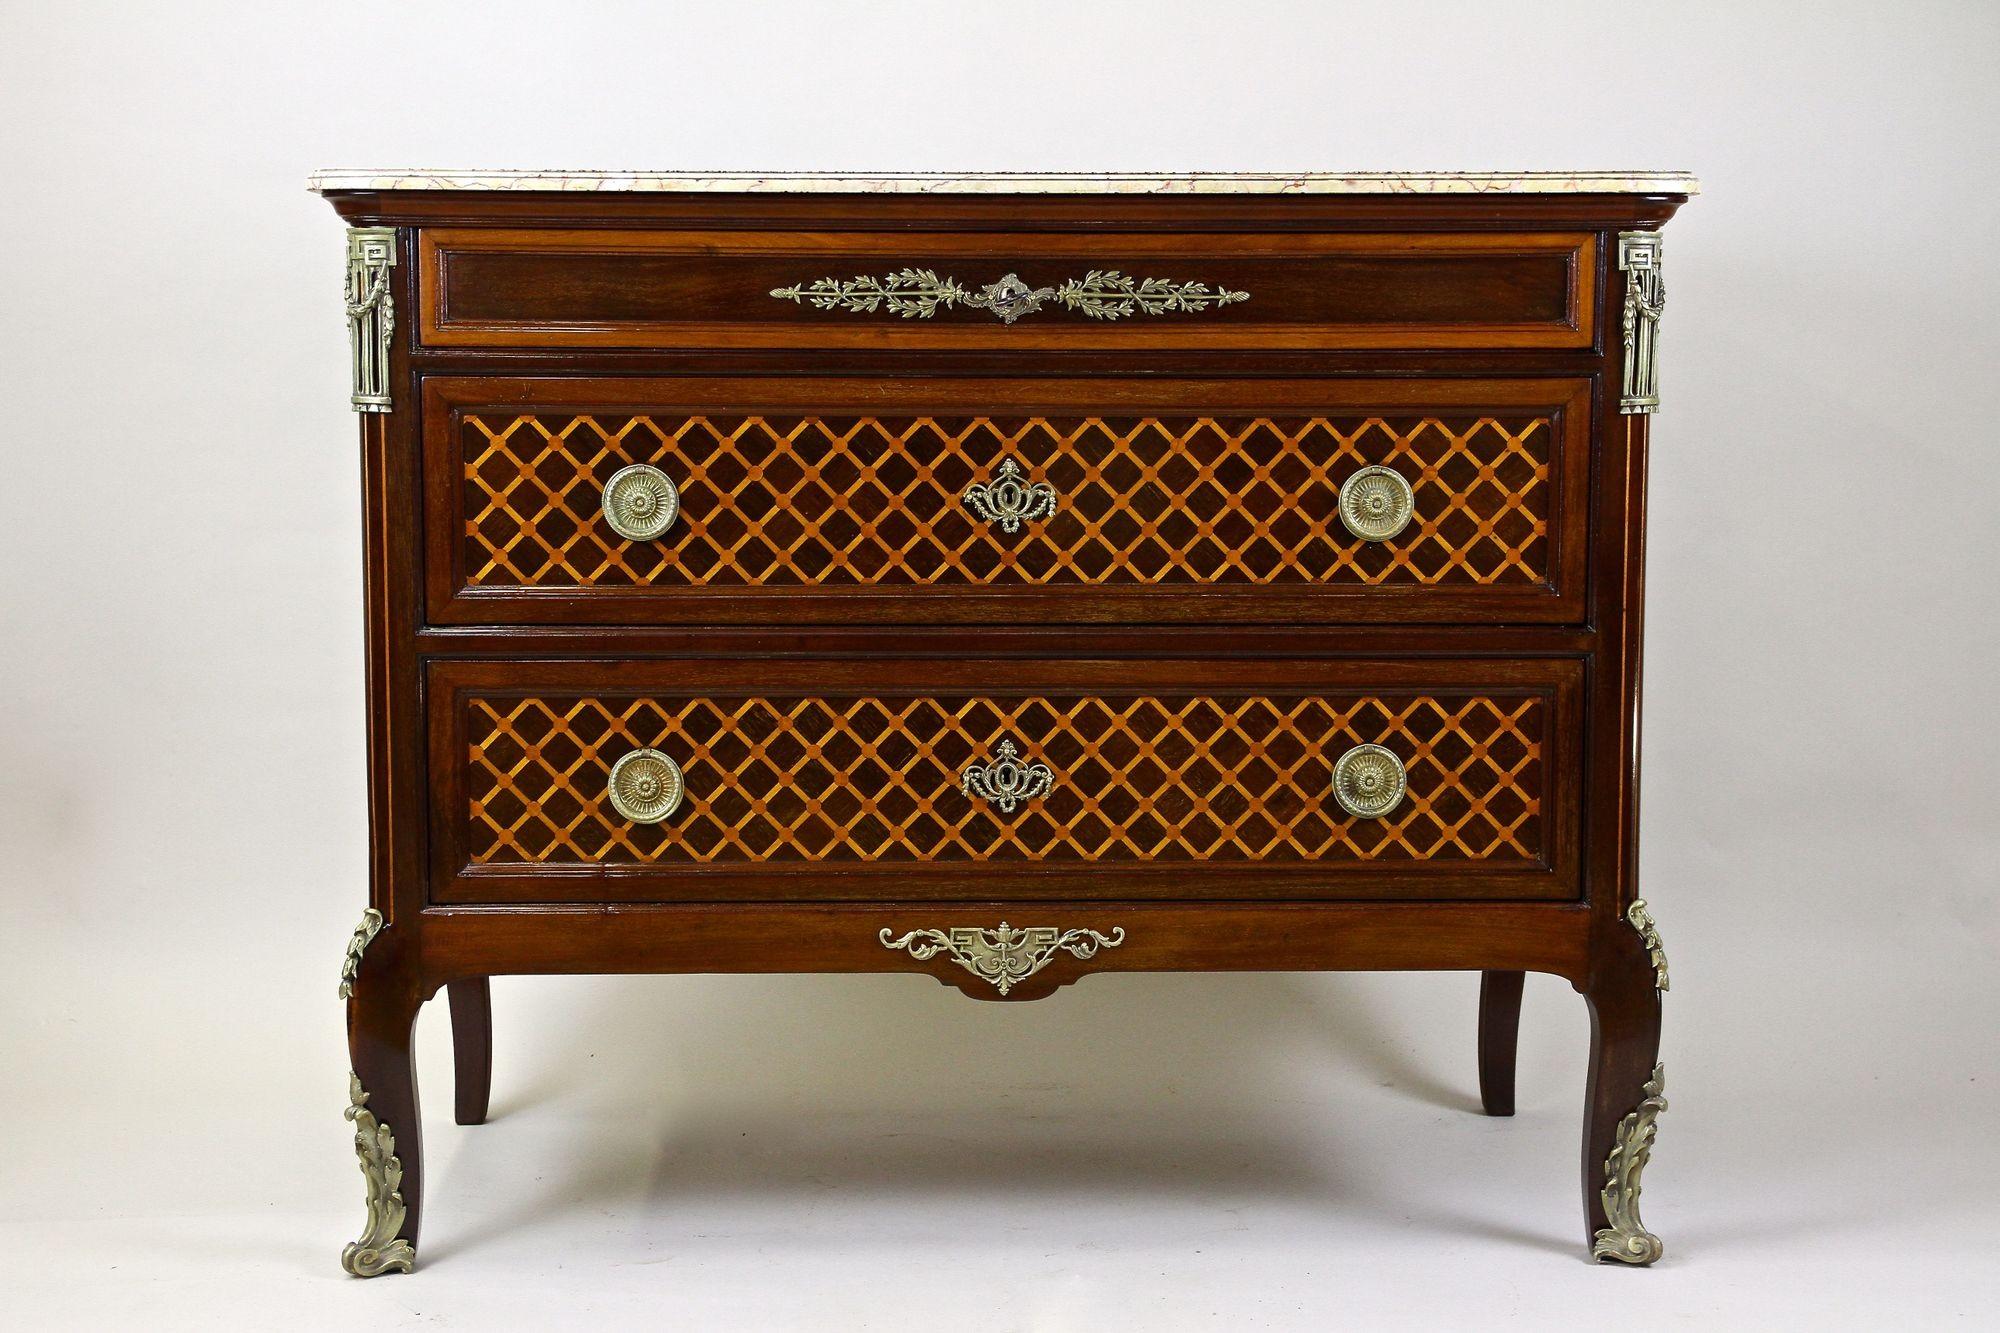 Elaborately crafted French marquetry chest of drawers from the period around 1870. An absolutely beauty of a late 19th century transitional commode, completely new restored, impressing with its fantastic looking marquetry work. The exceptional